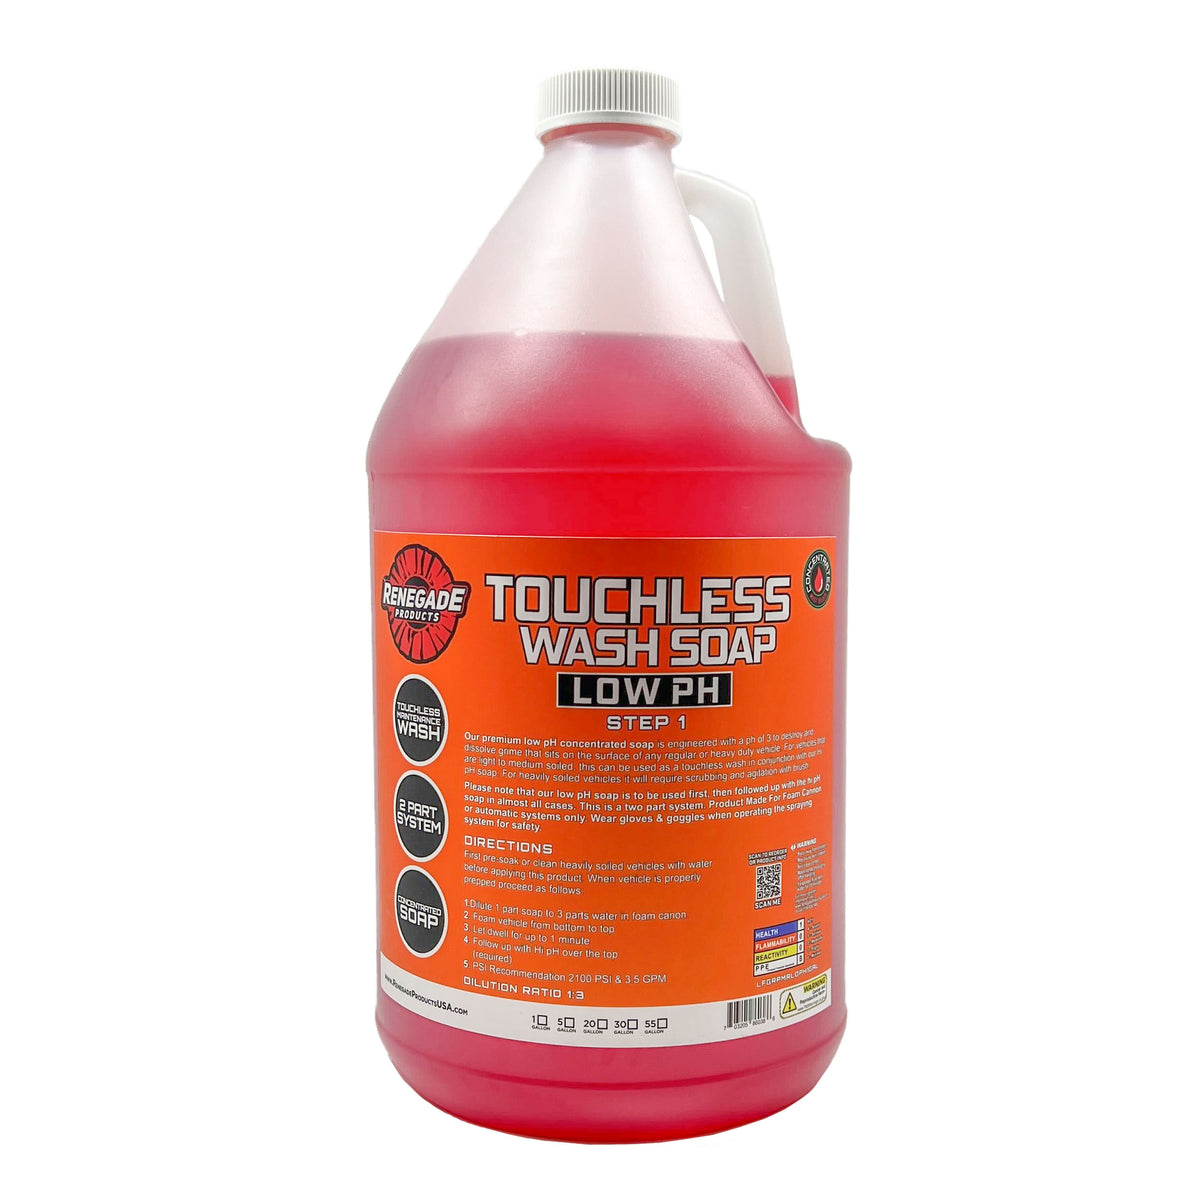 Touchless 2-Step Truck Wash Soap System